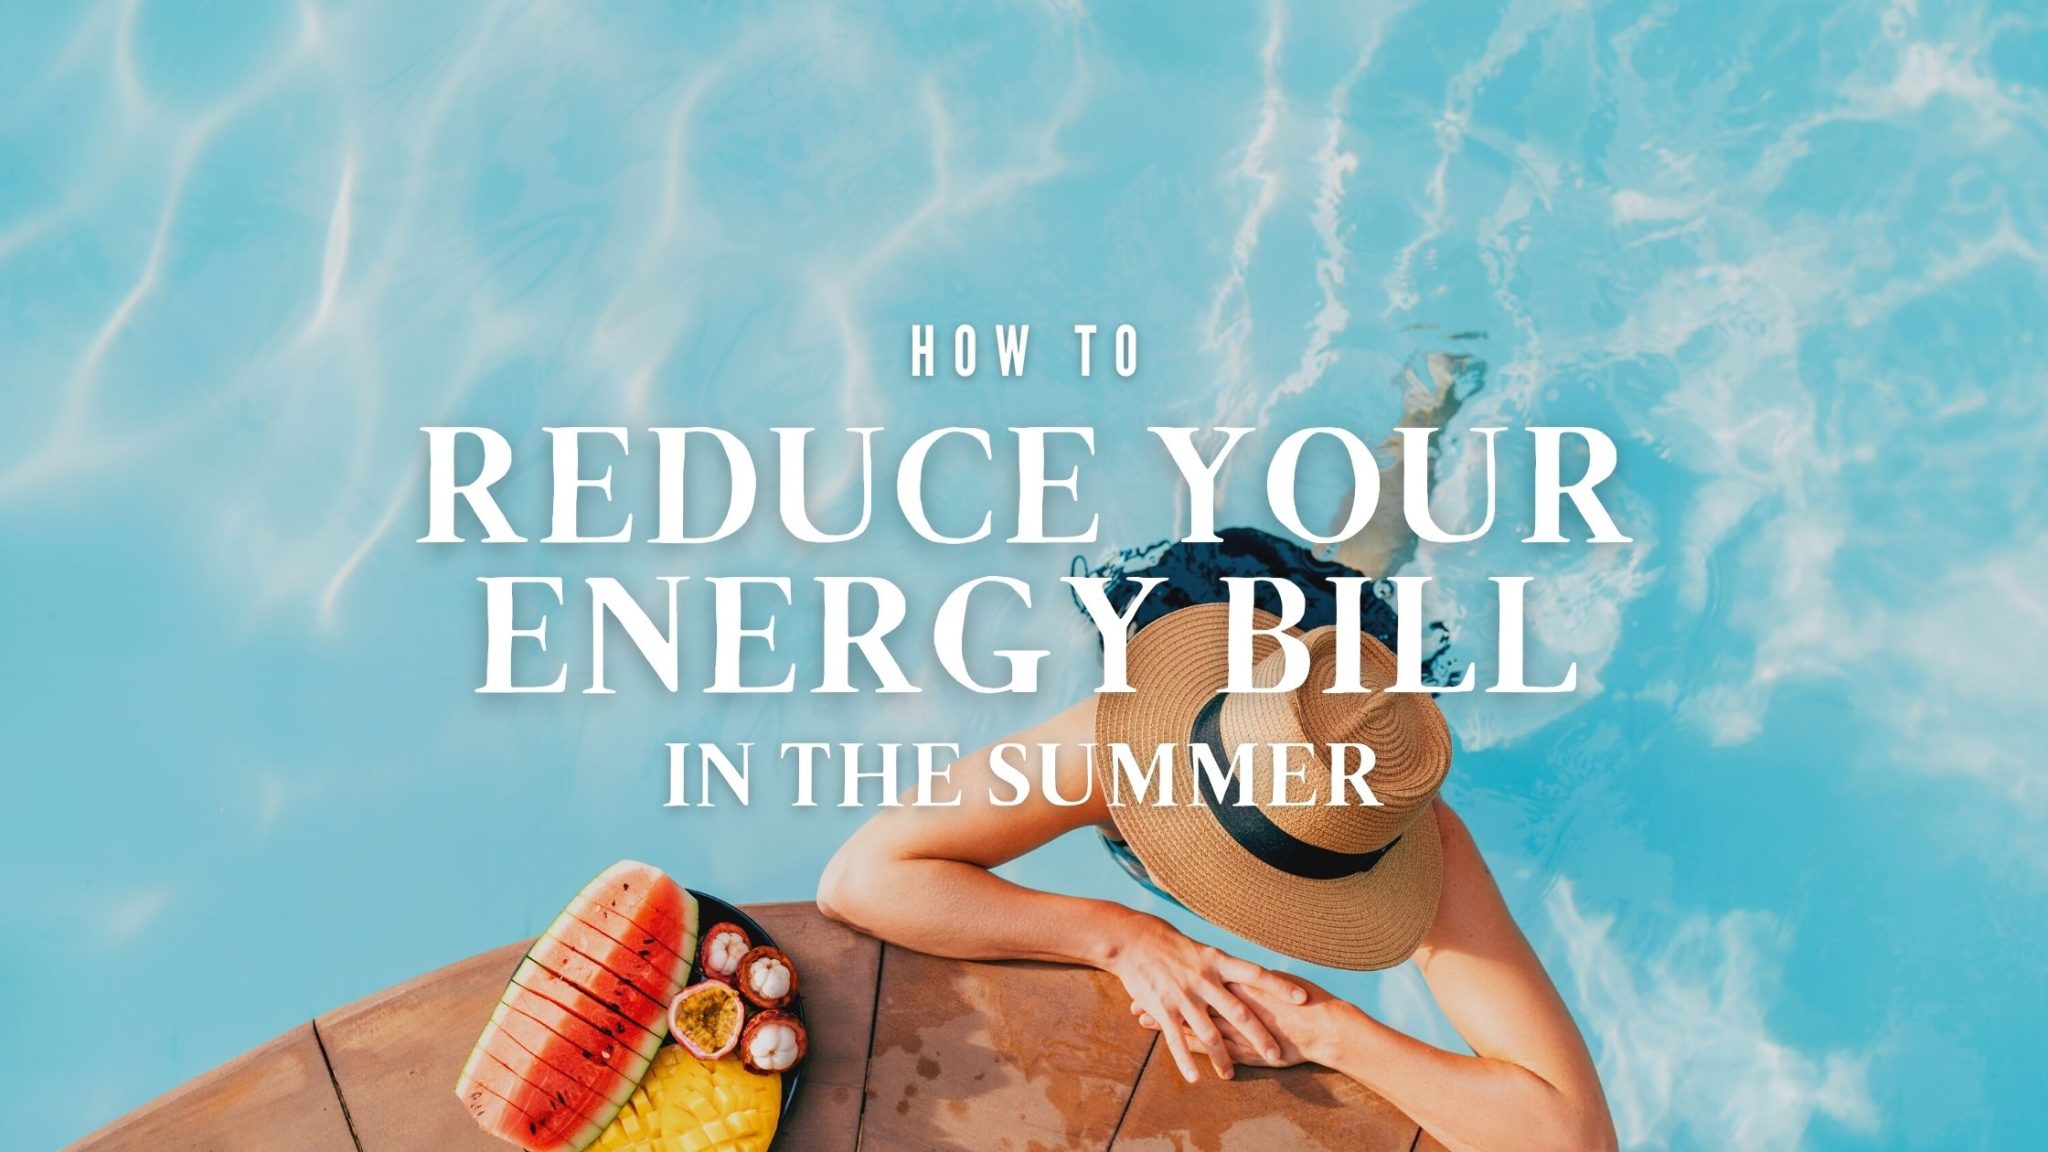 How to Reduce Your Energy Bill In the Summer